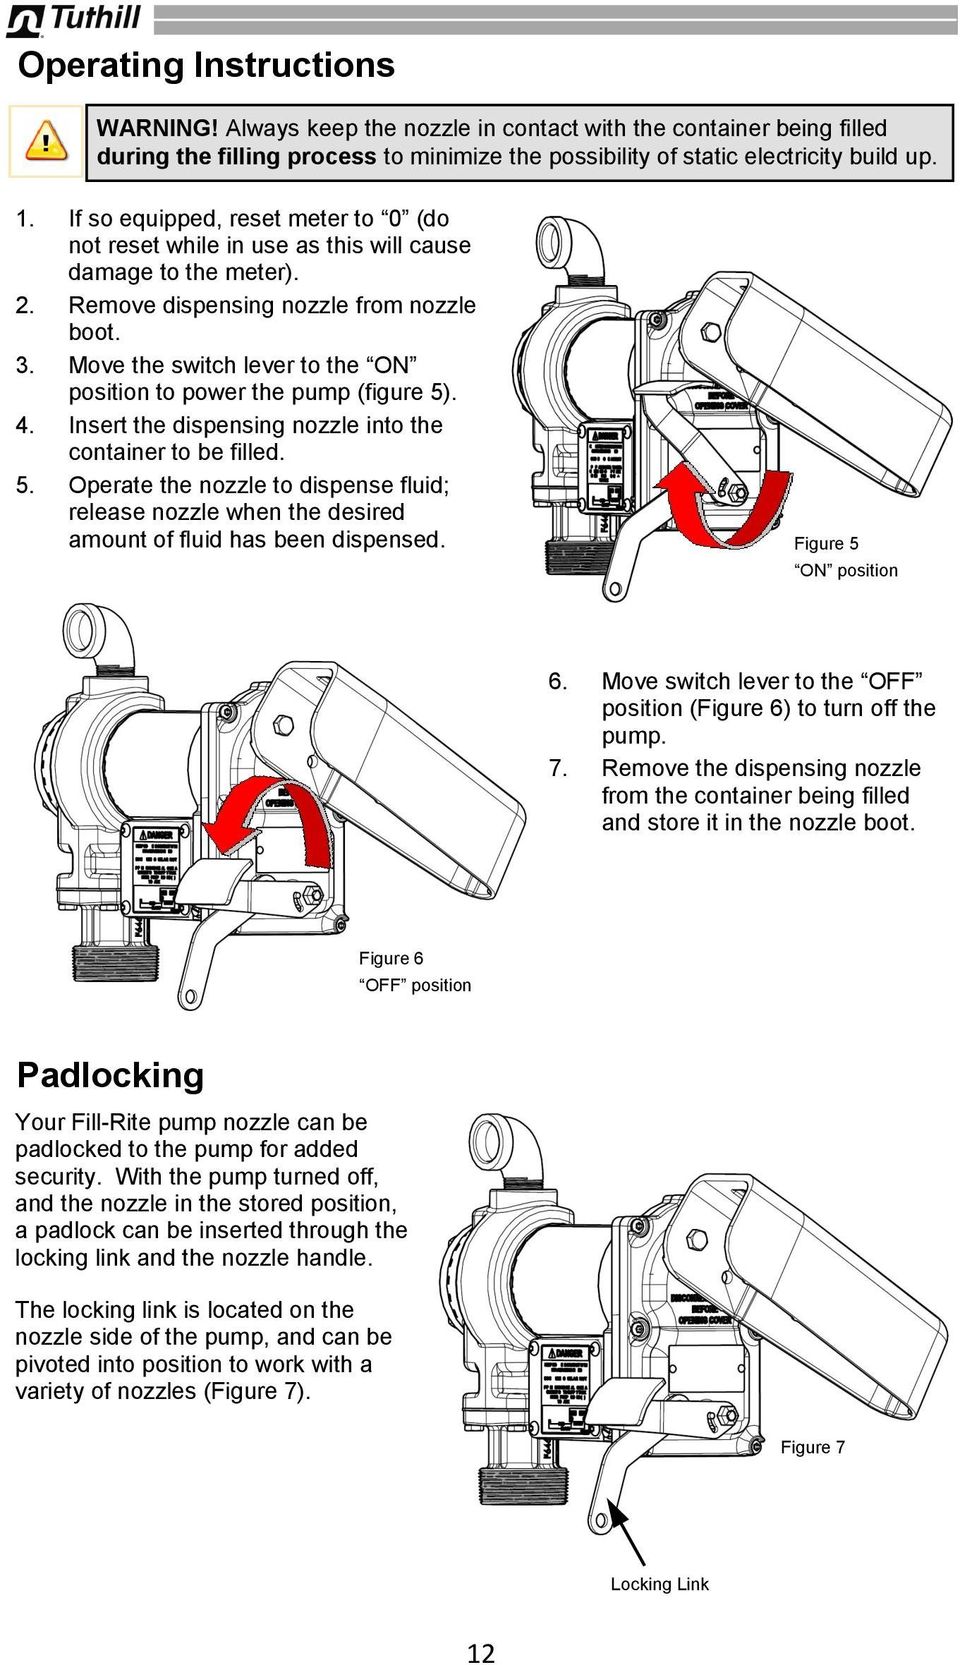 Move the switch lever to the ON position to power the pump (figure 5). 4. Insert the dispensing nozzle into the container to be filled. 5. Operate the nozzle to dispense fluid; release nozzle when the desired amount of fluid has been dispensed.